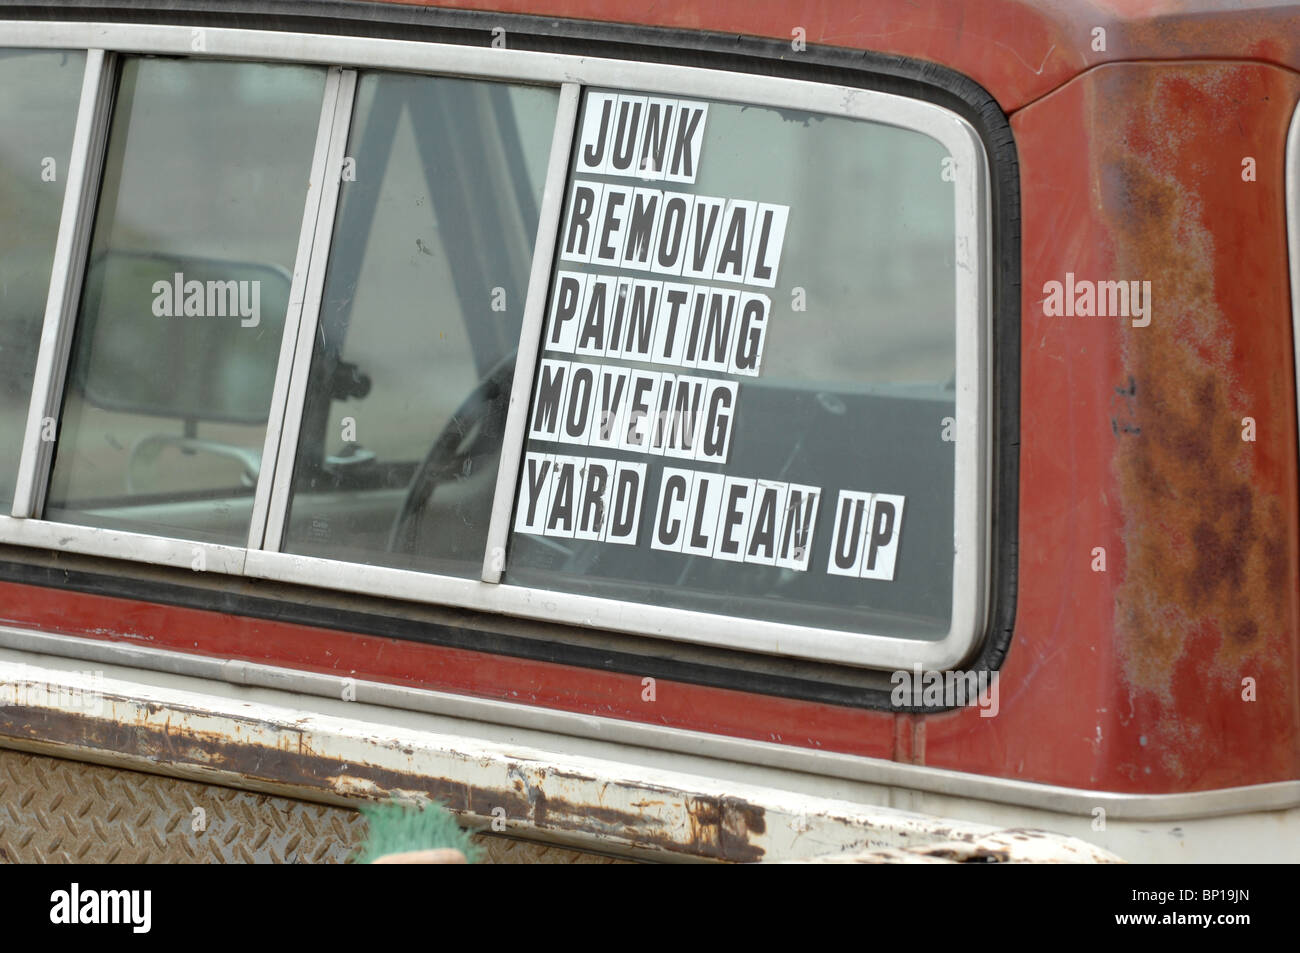 Sign with misspellings on the back of an entrepreneur's pickup truck 'JUNK REMOVAL PAiNTING [sic] MOVEING [sic] YARD CLEAN UP' Stock Photo